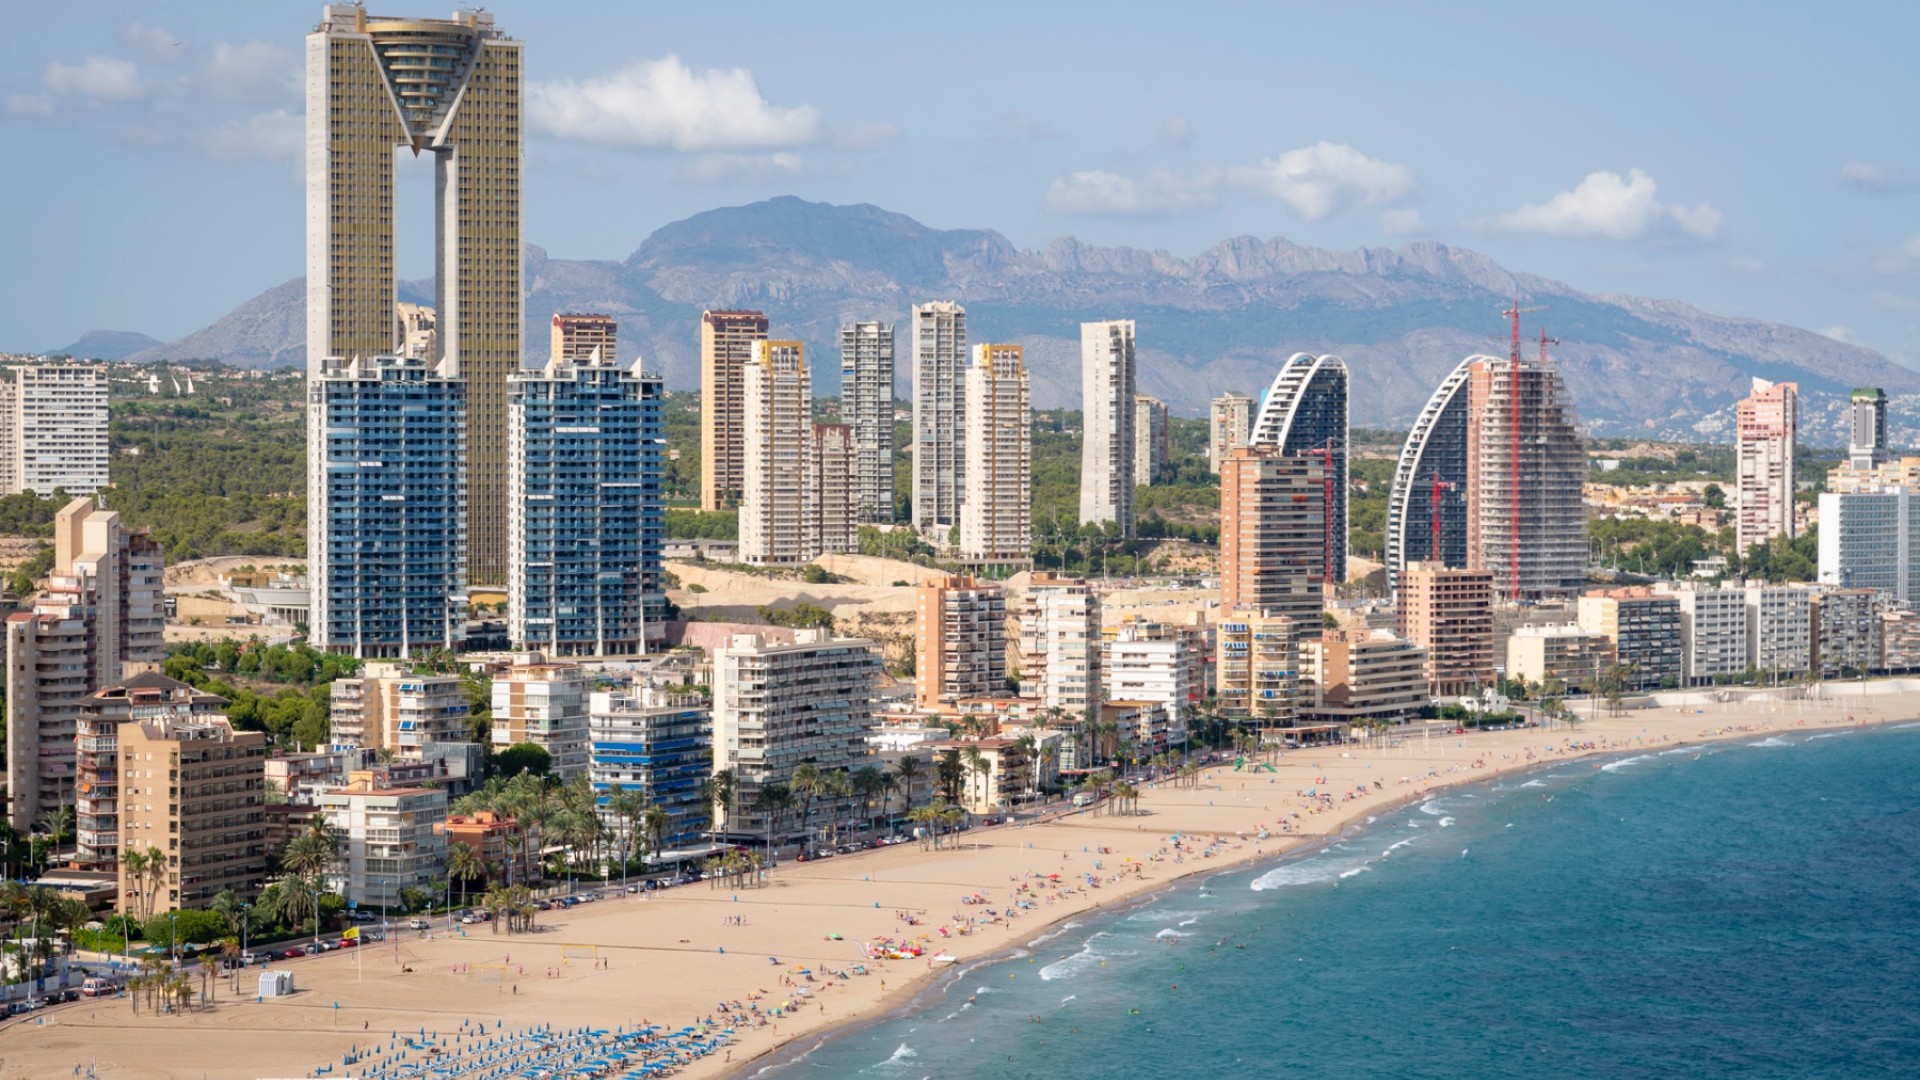 256 apartments-Intempo Residential Sky(view) Resort in Benidorm, Alicante province, near the blue flag beaches of Playa de Poniente